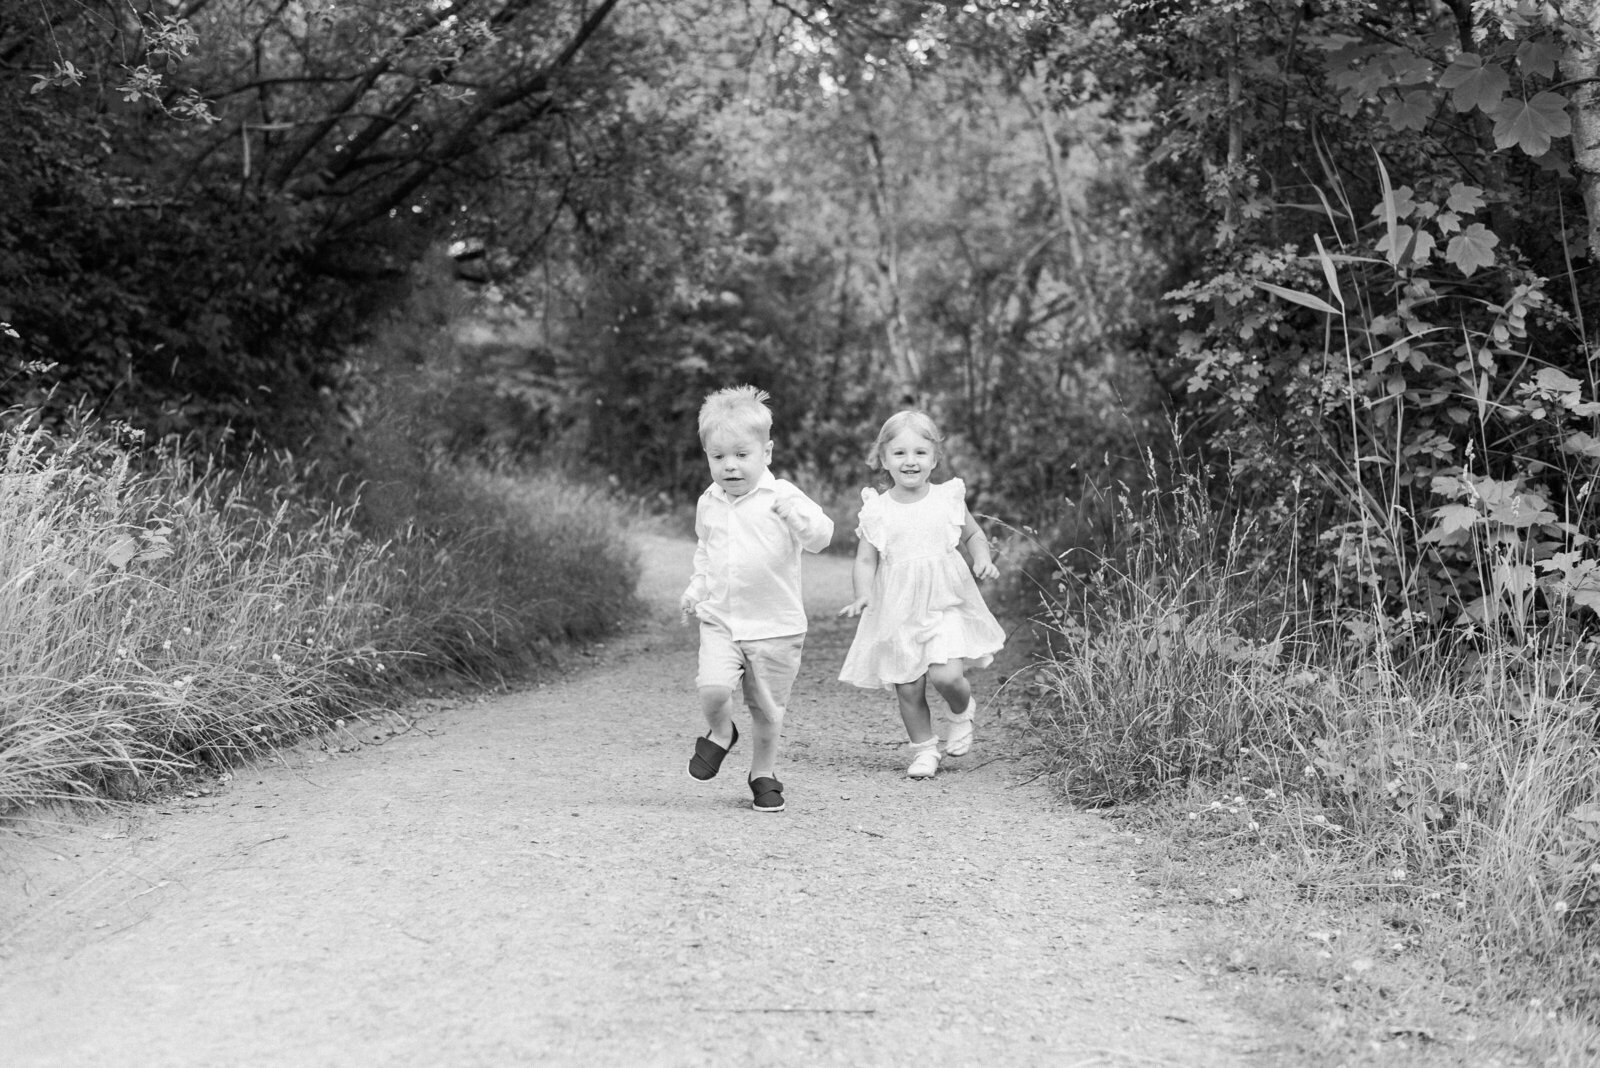 A girl and boy running through the woods in billingshurst family photoshoot